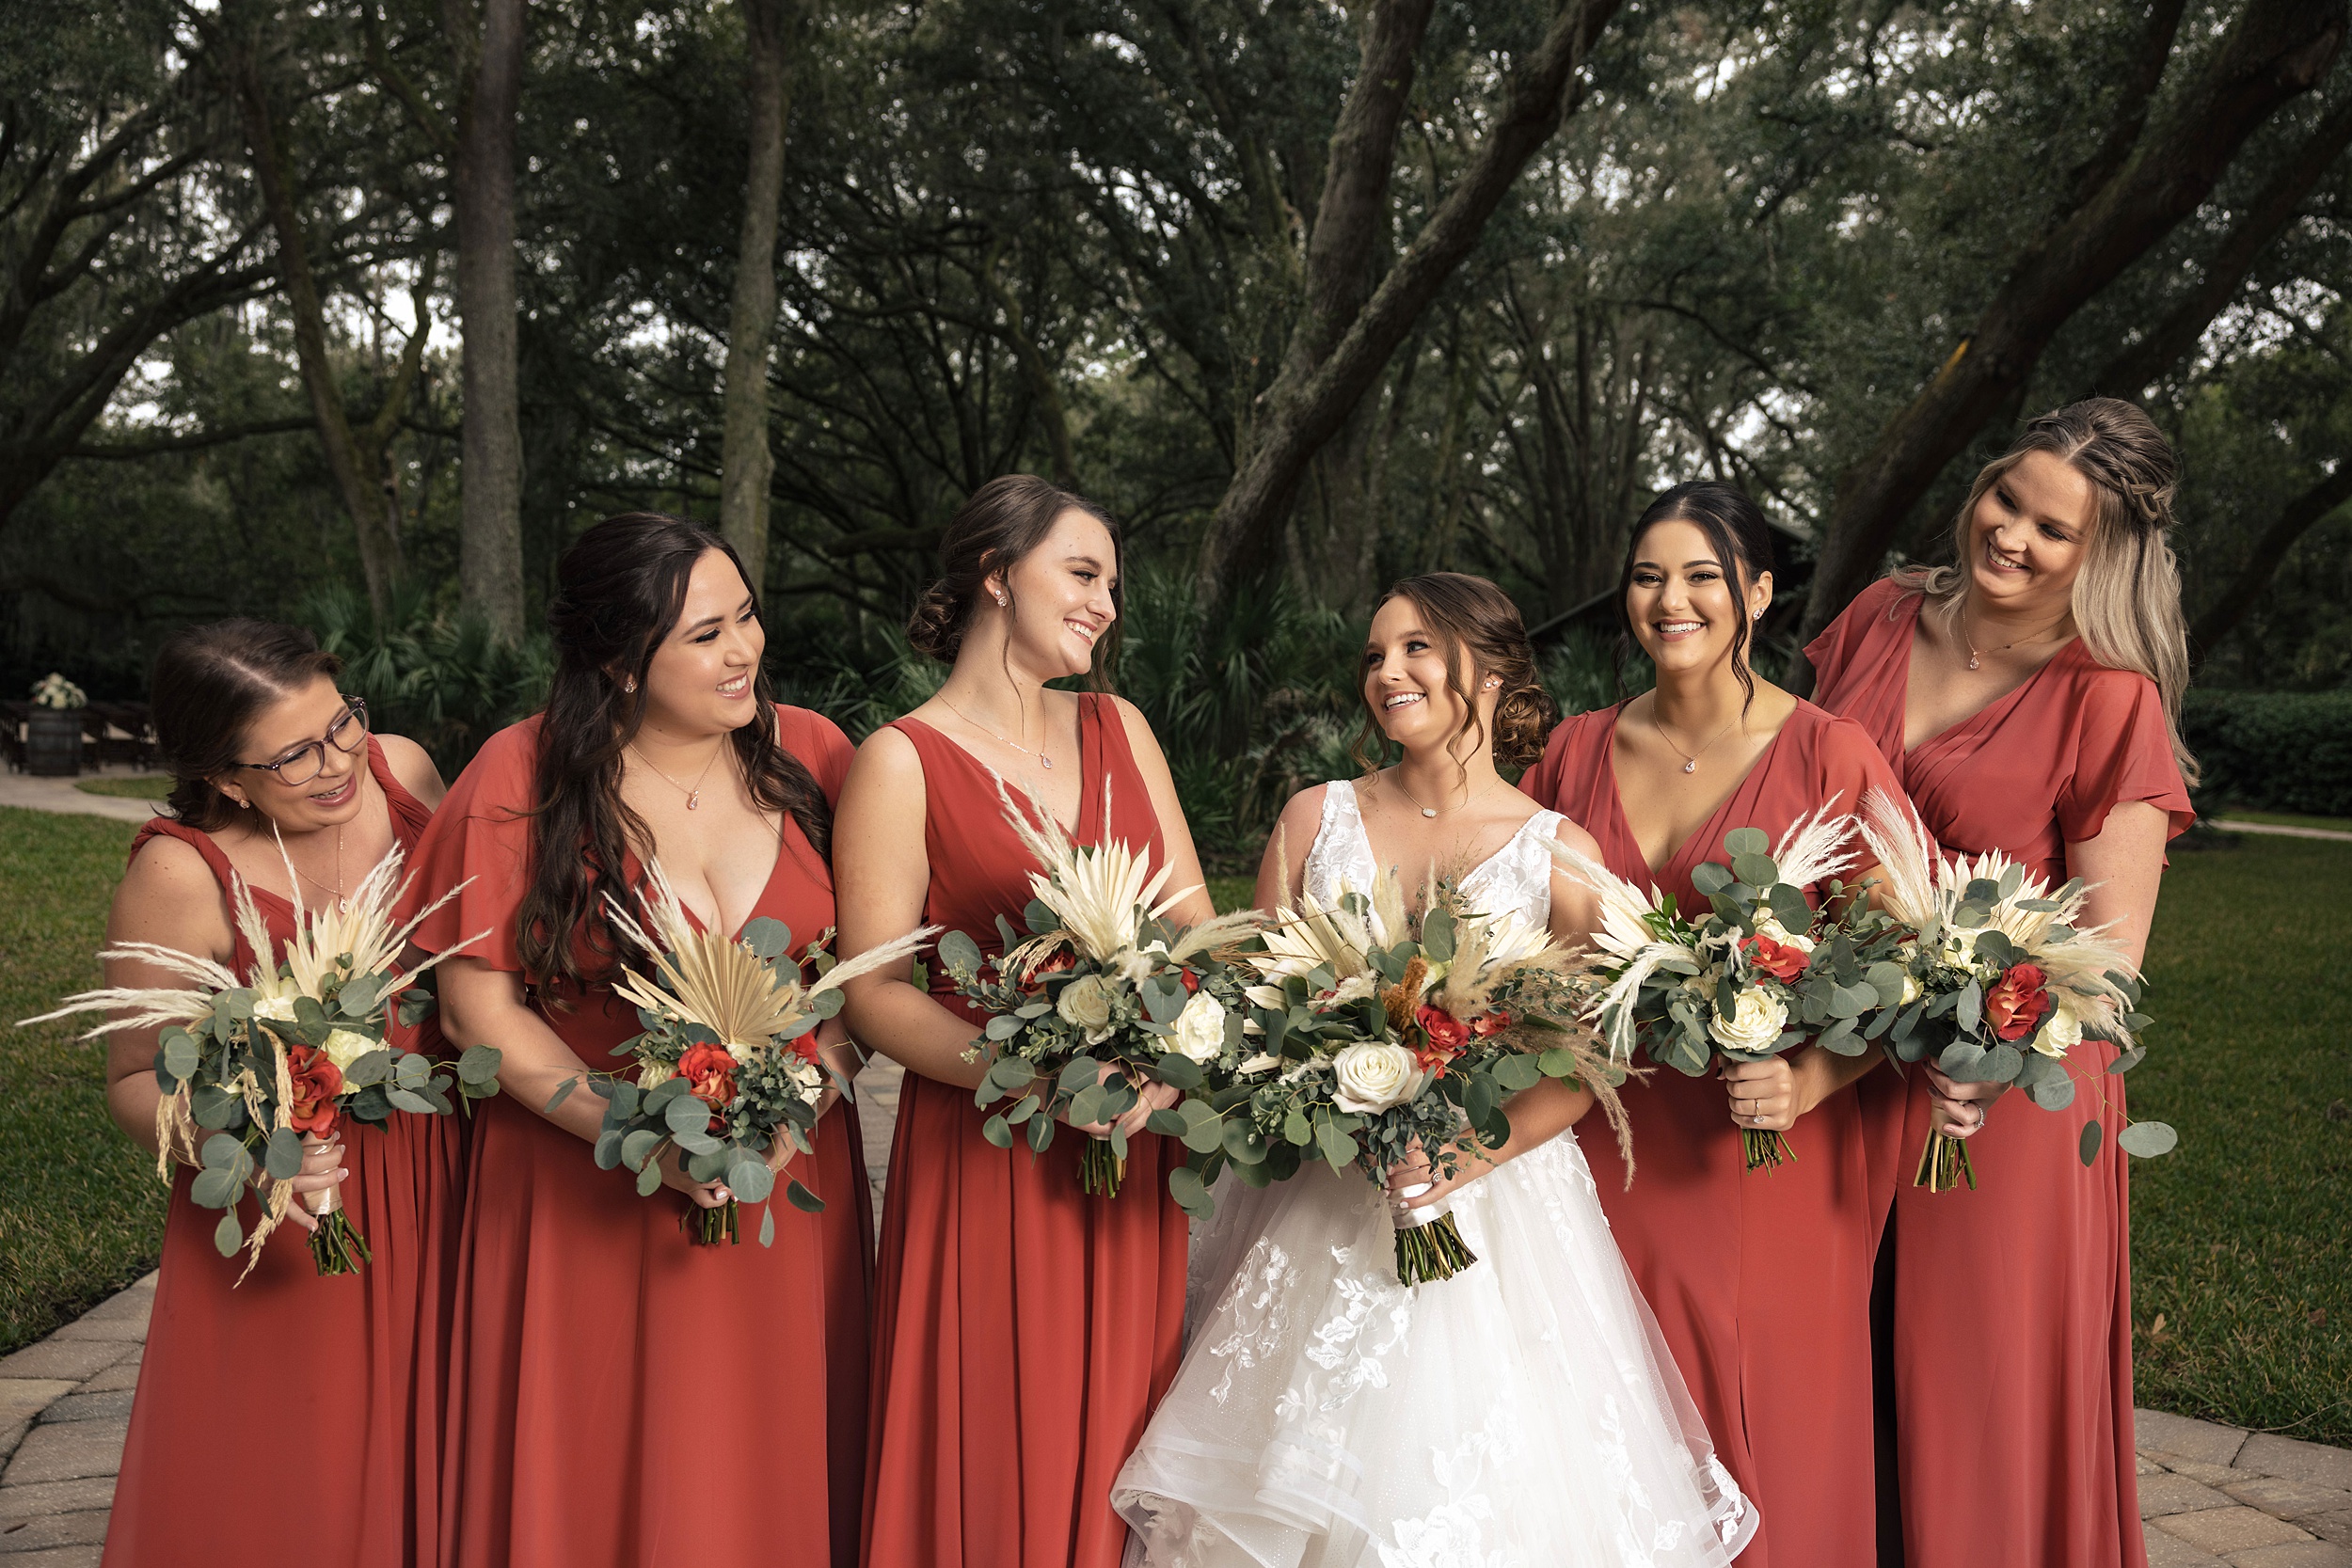 A bride laughs with her bridal party in red dresses holding their bouquets under large oak trees at her bowing oaks wedding